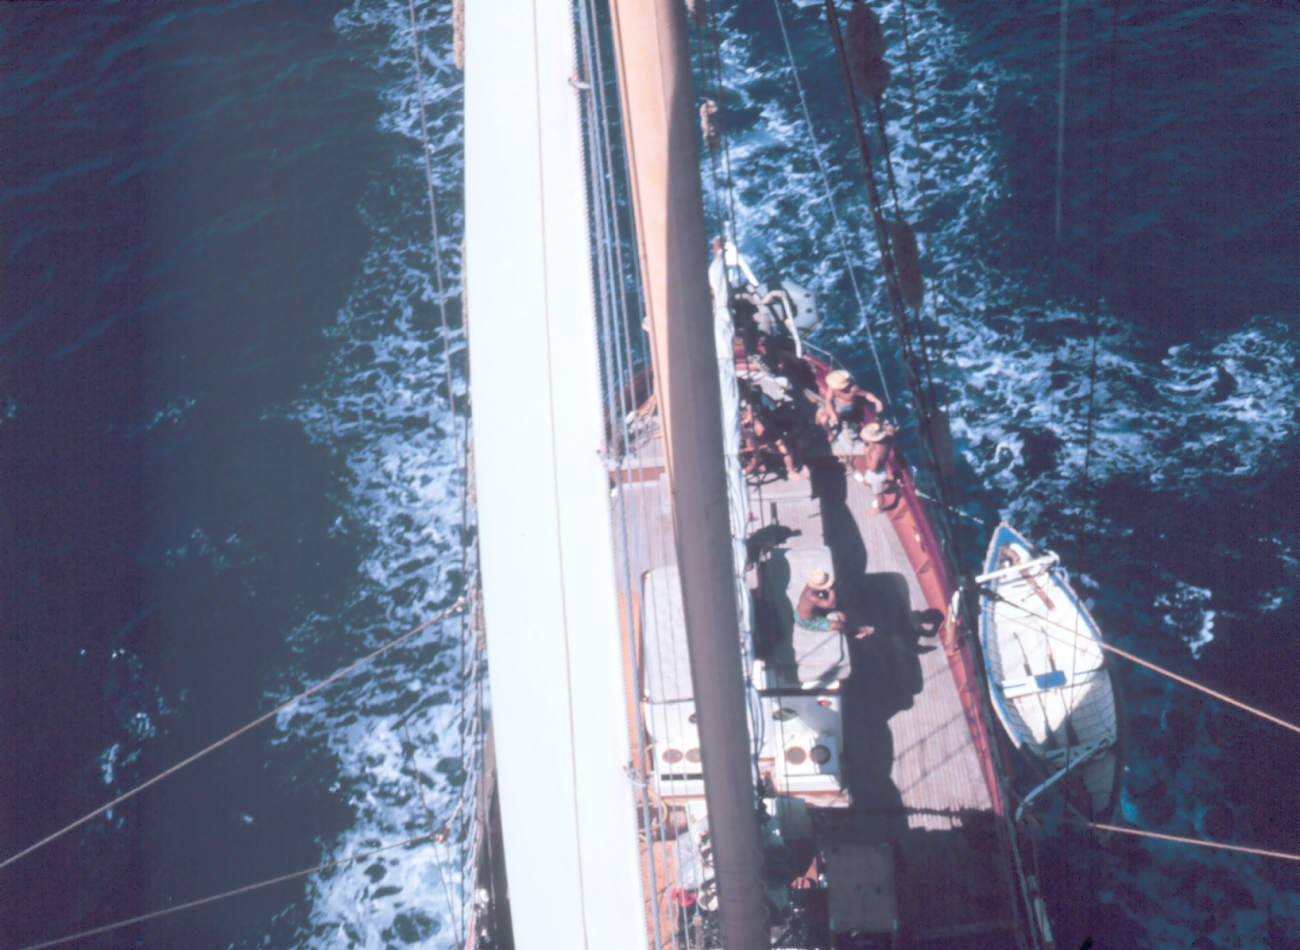 A view of the deck of the WESTWARD while under sail